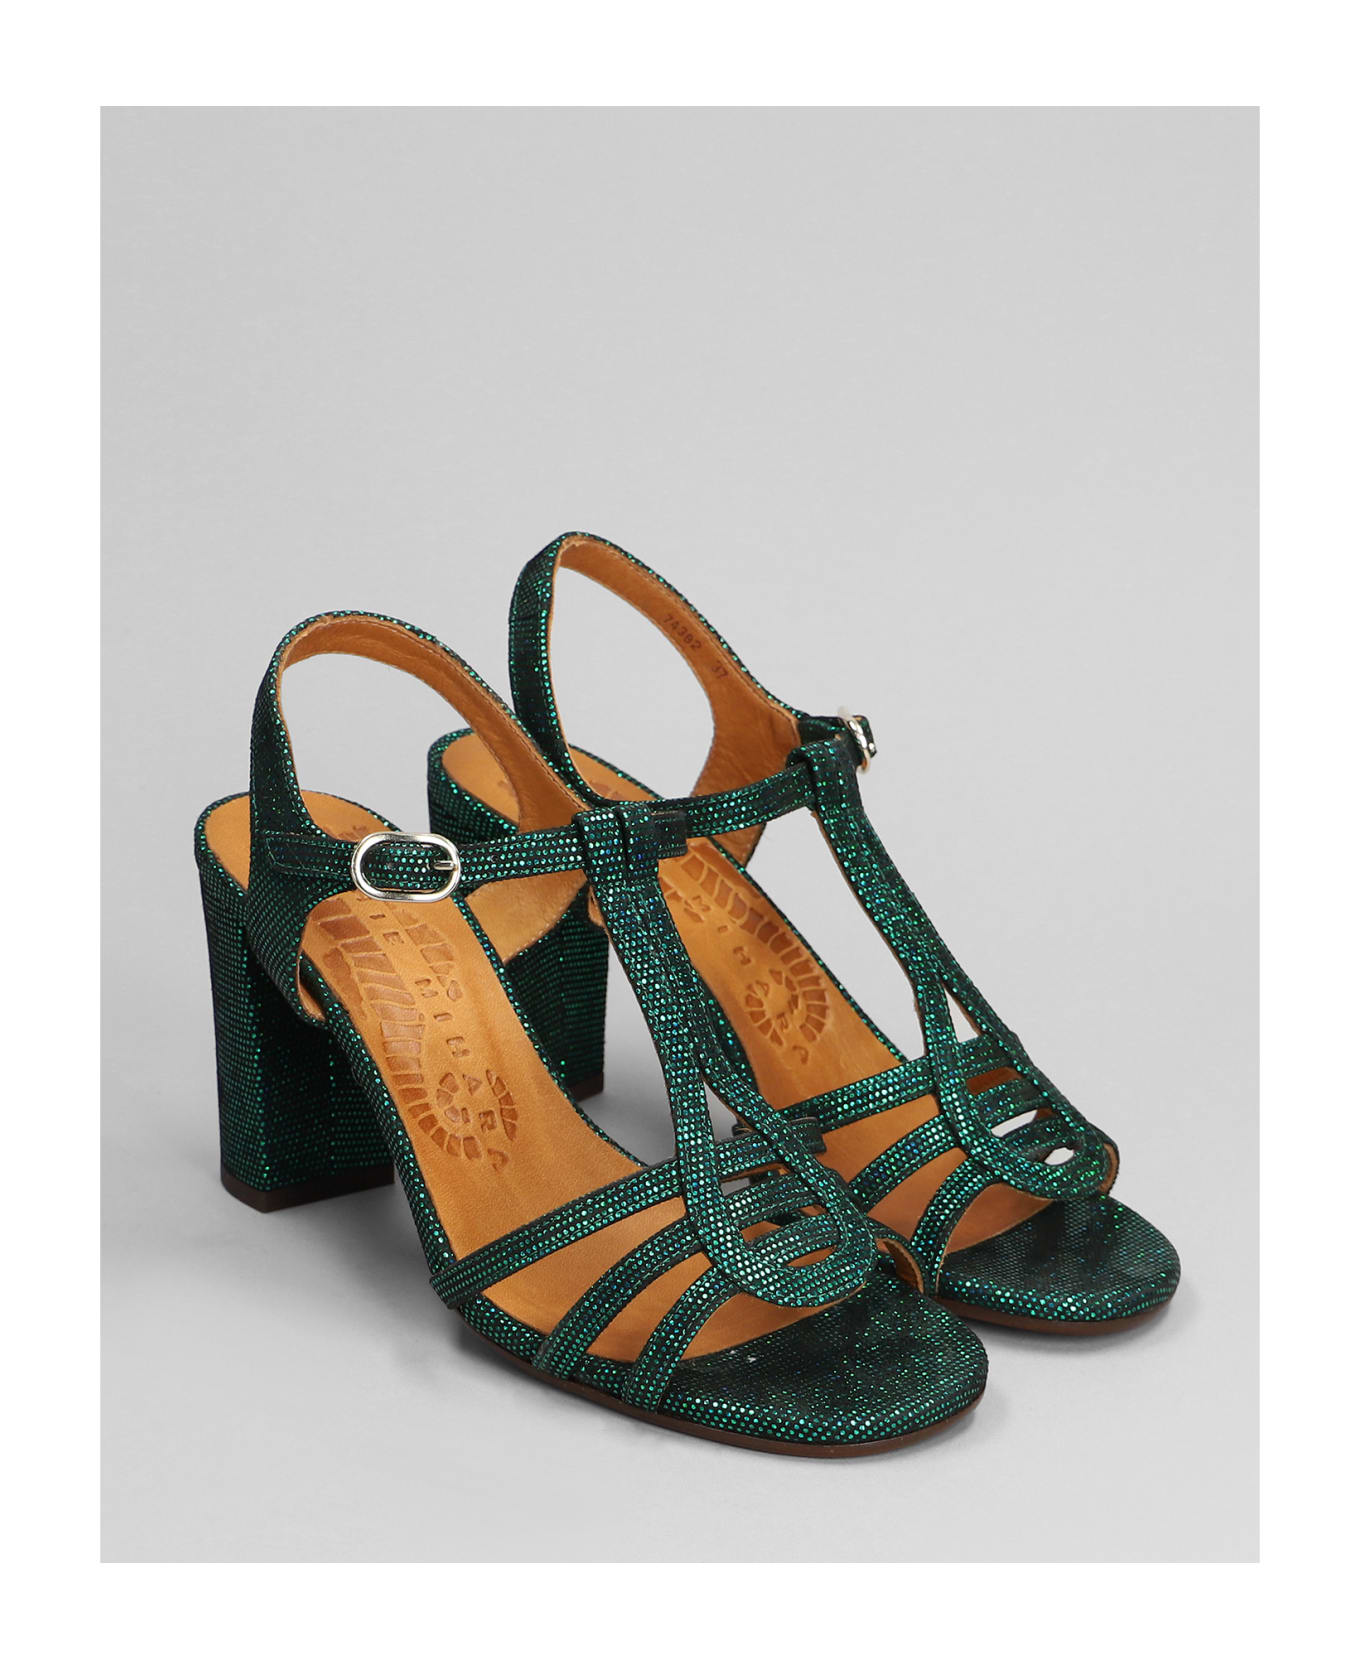 Chie Mihara Babi 44 Sandals In Green Leather - green